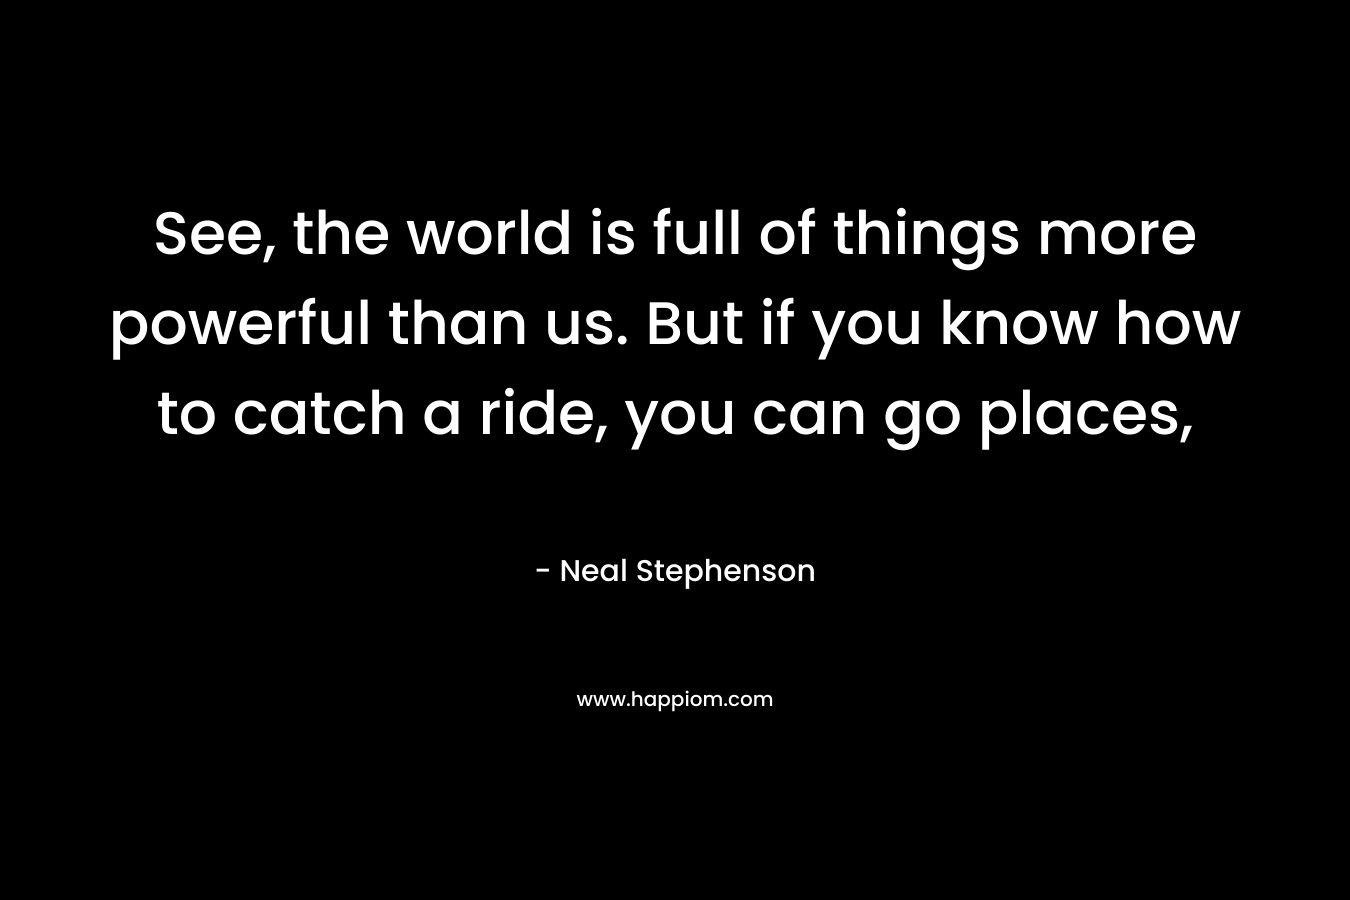 See, the world is full of things more powerful than us. But if you know how to catch a ride, you can go places, – Neal Stephenson